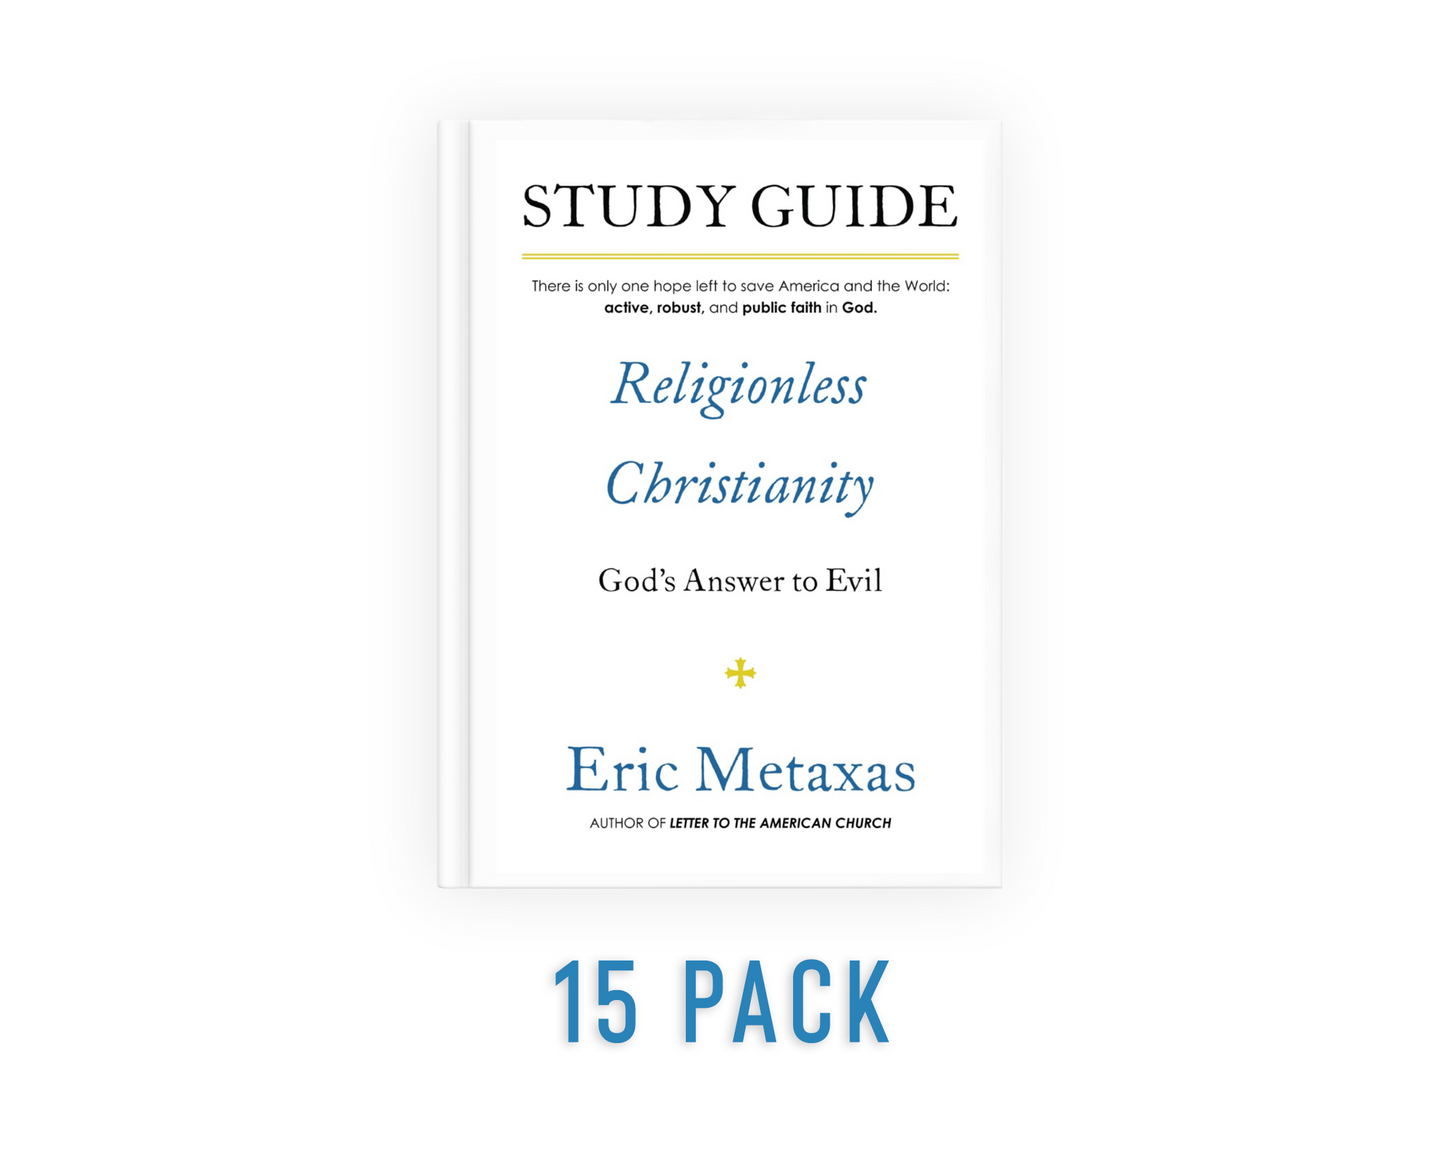 Study Guide: Religionless Christianity - BUNDLE PACKS